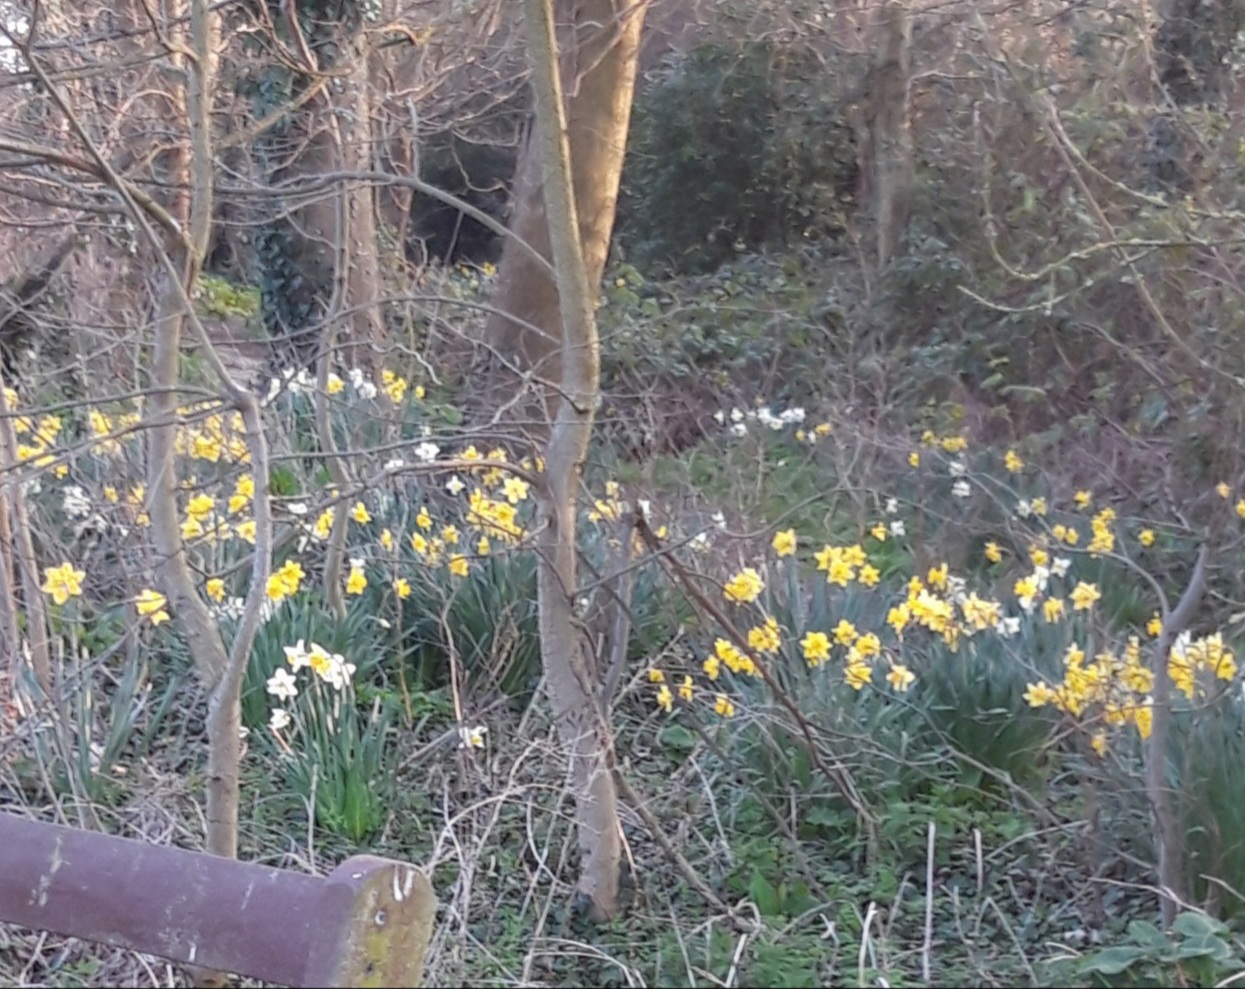 Yellow daffodils in the woods